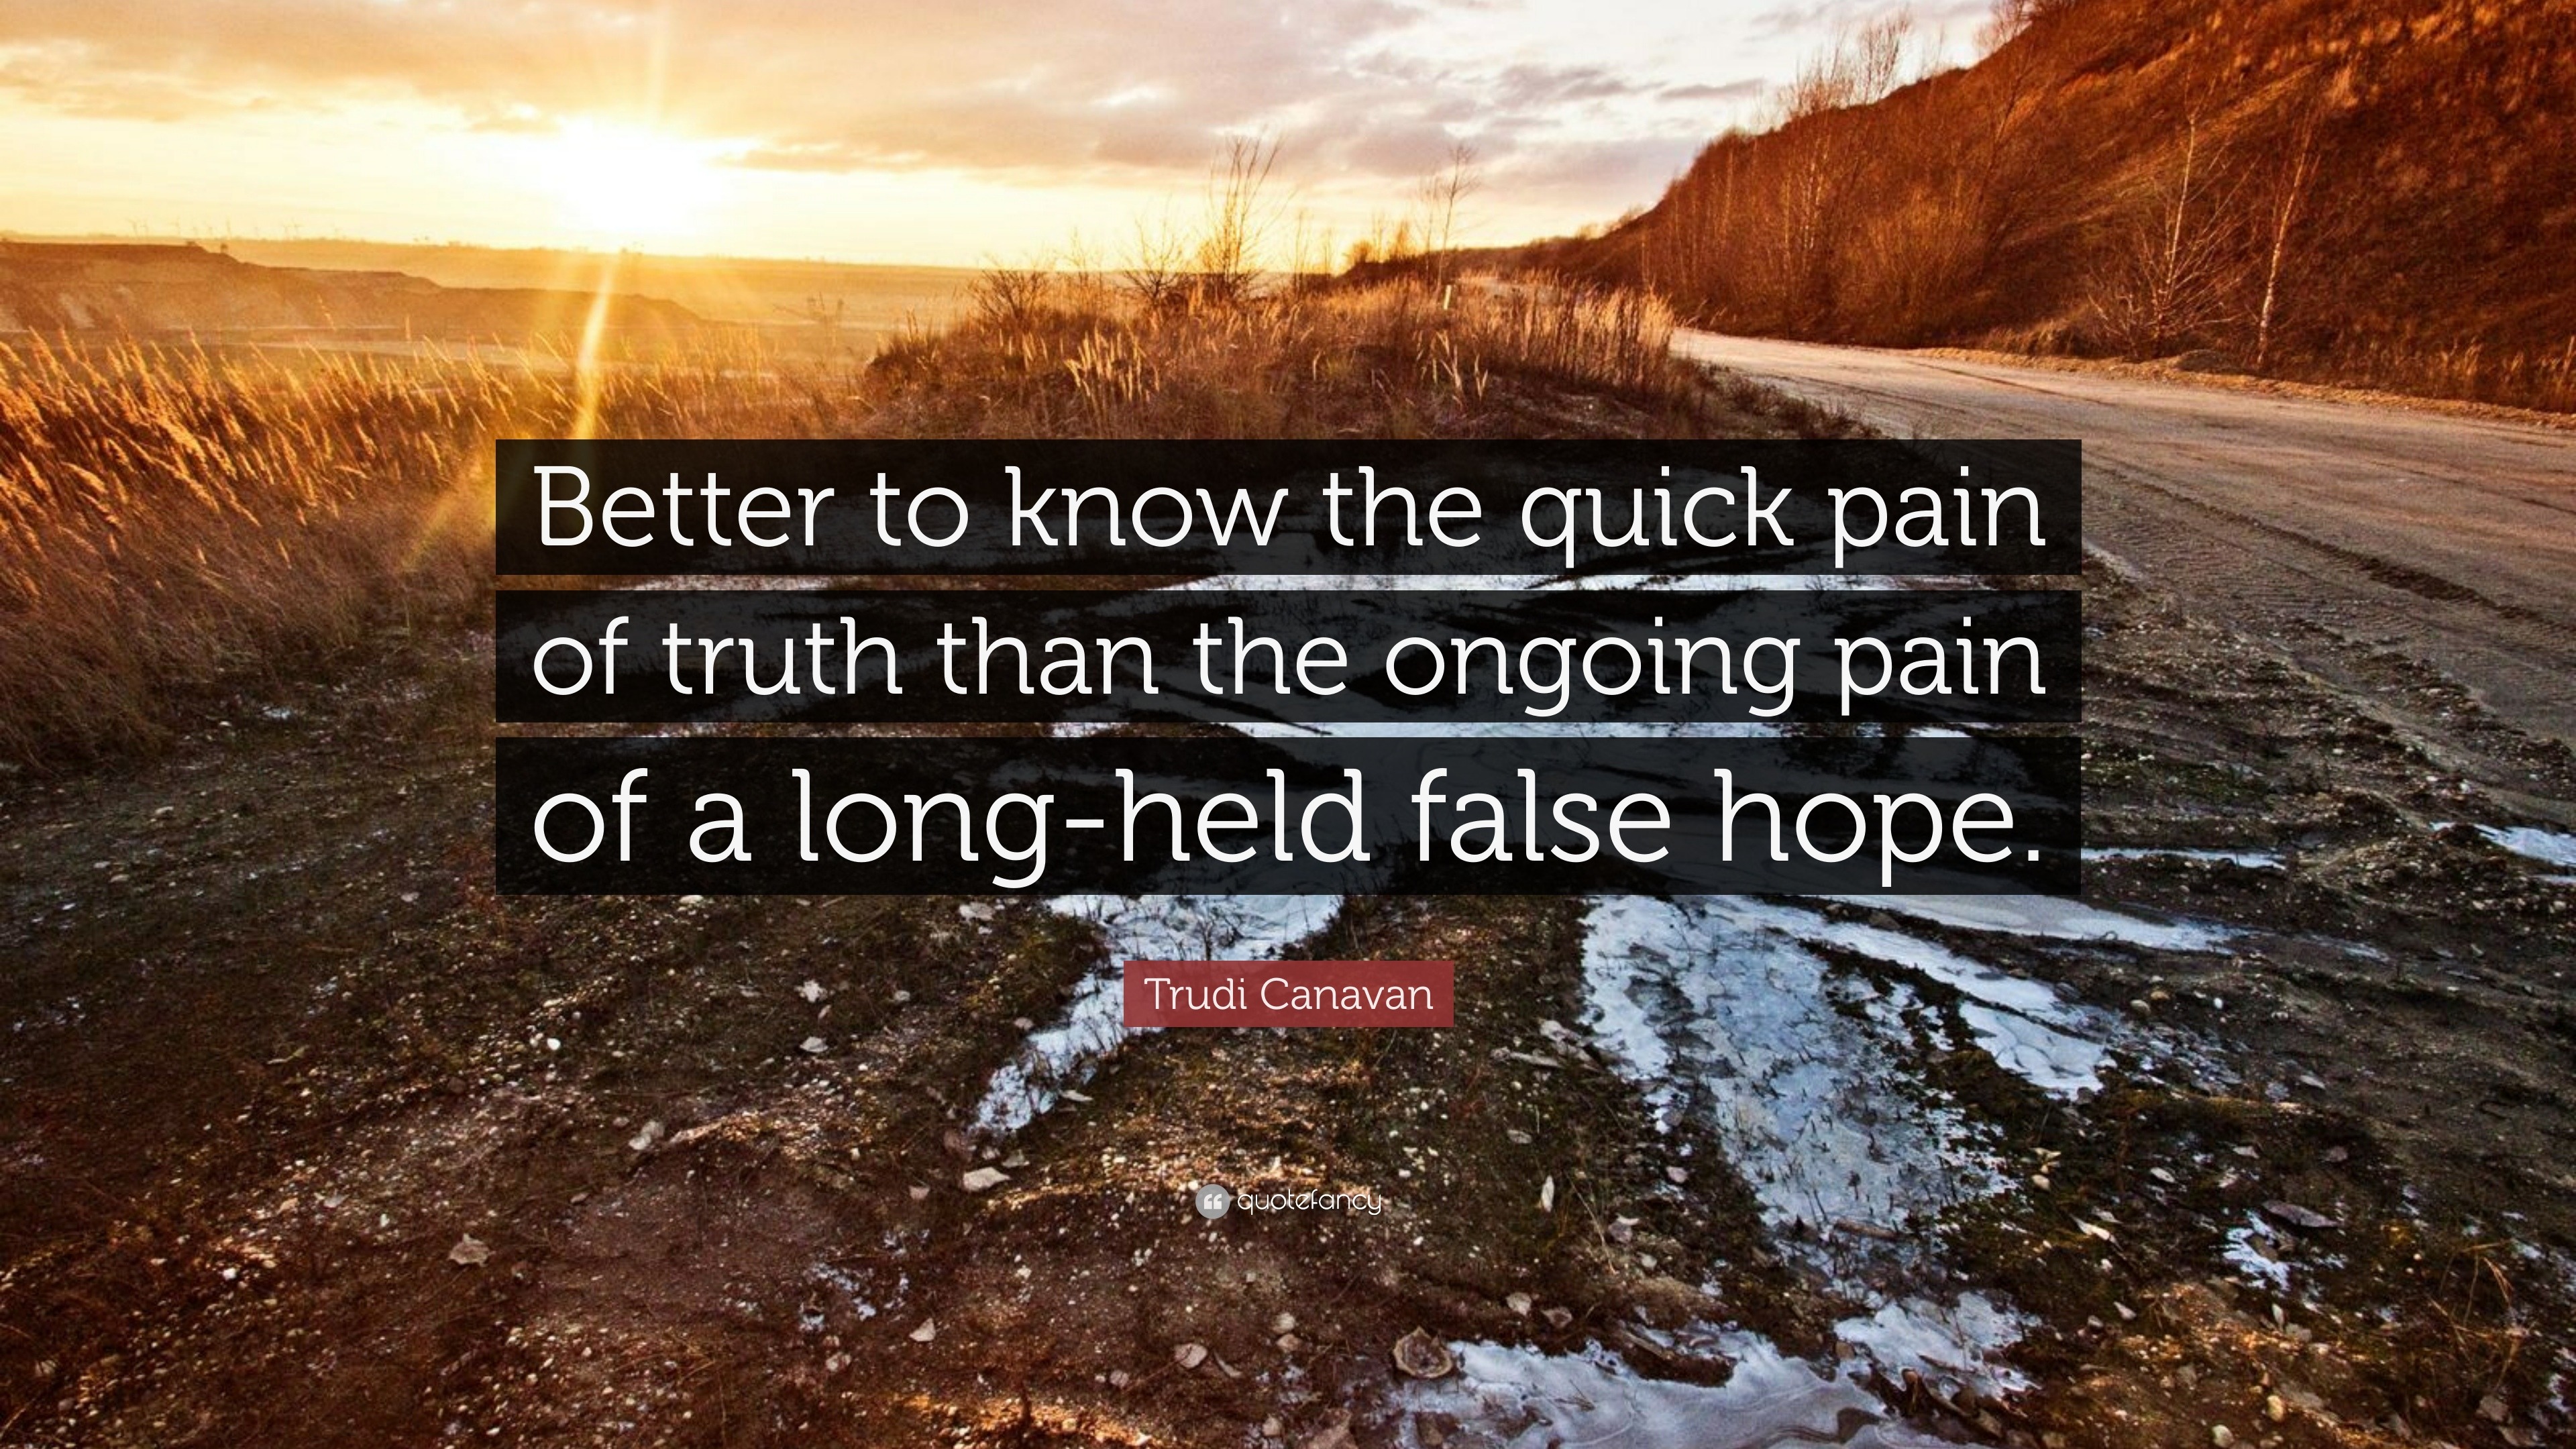 Trudi Canavan Quote: "Better to know the quick pain of ...